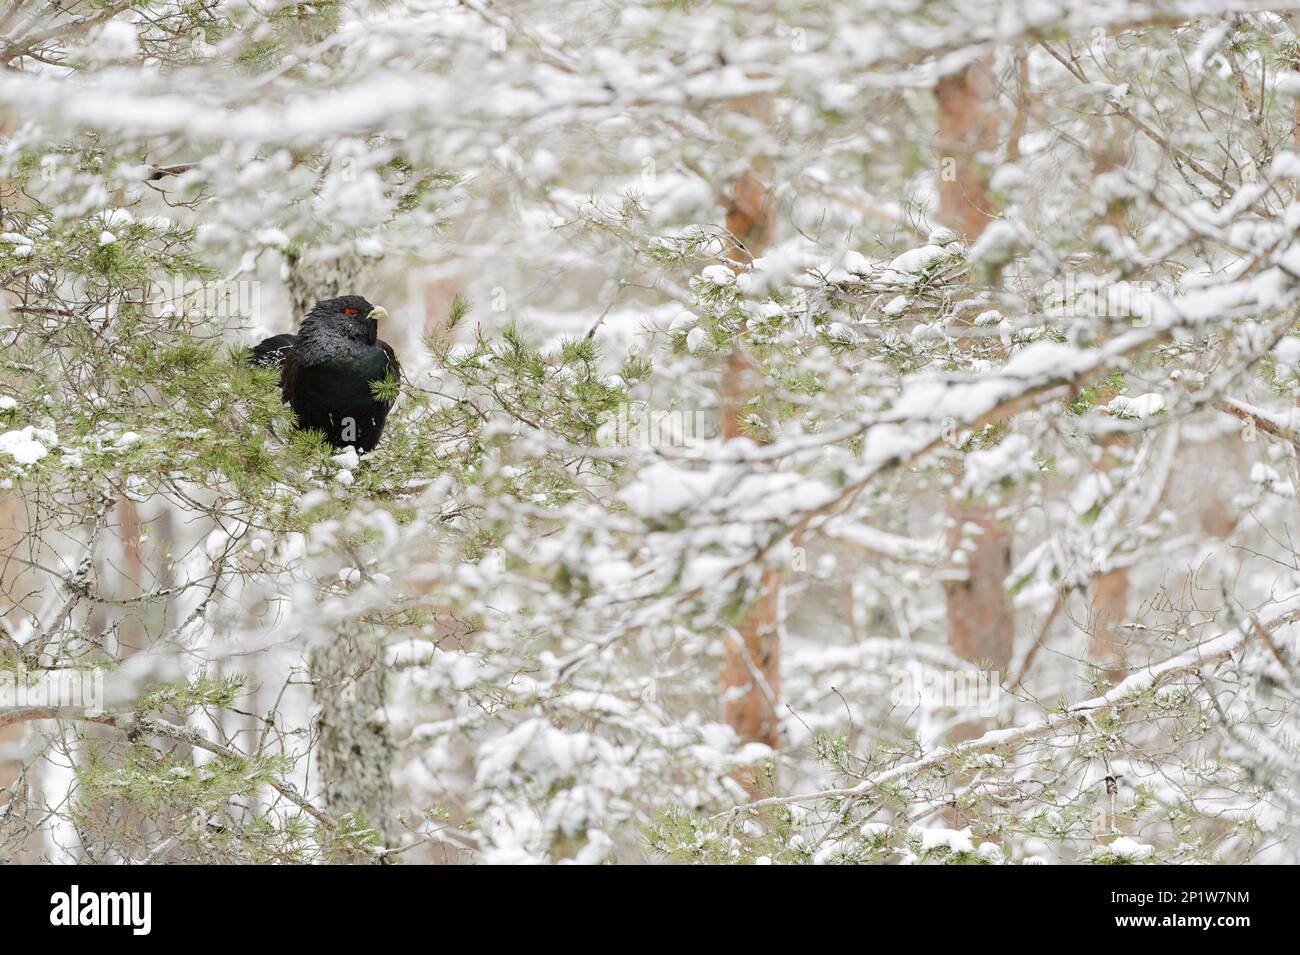 Western western capercaillie (Tetrao urogallus urogallus), adult male, sitting on a snow-covered branch of scots pine (Pinus sylvestris), Alvie Stock Photo